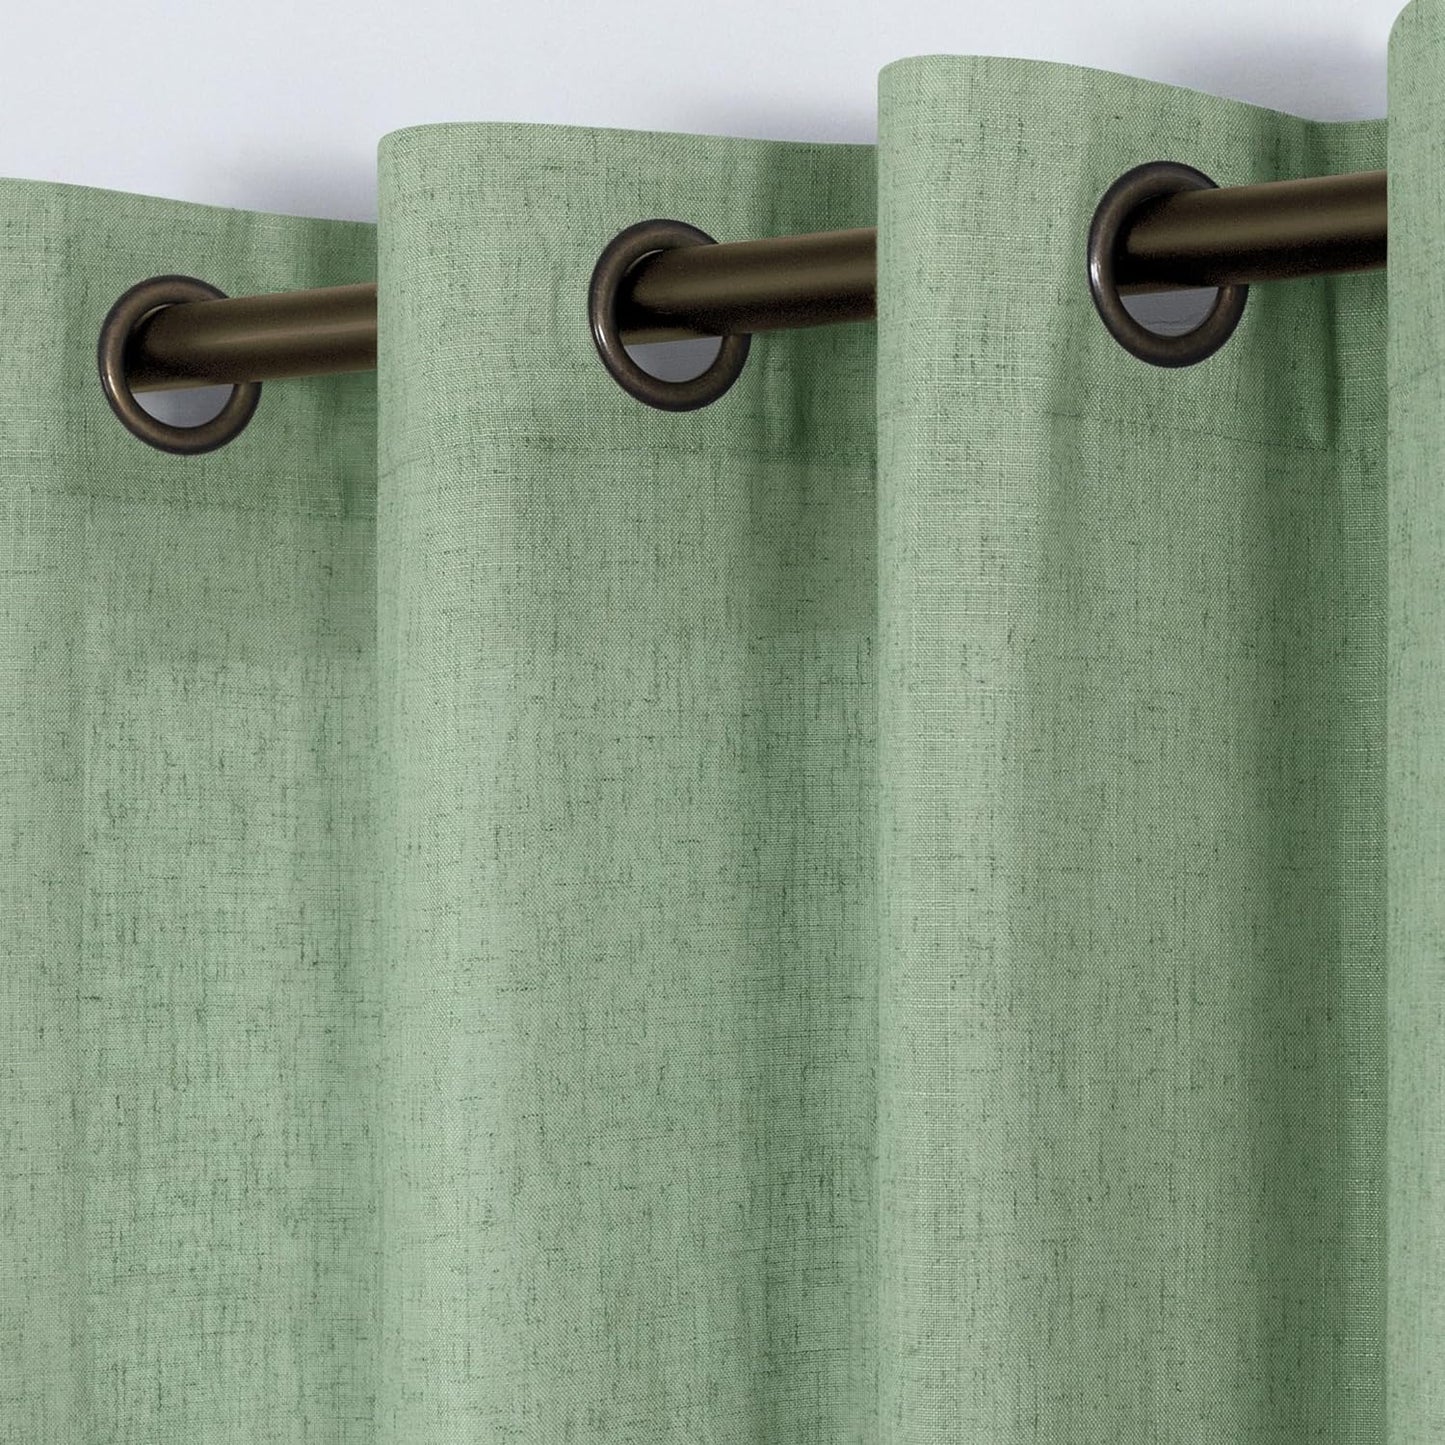 KOUFALL Beige Rustic Country Curtains for Living Room 84 Inches Long Flax Linen Bronze Grommet Tan Sand Color Solid Faux Linen Curtains for Bedroom Sliding Glass Patio Door 2 Panels  KOUFALL TEXTILE Sage Green 52X96 